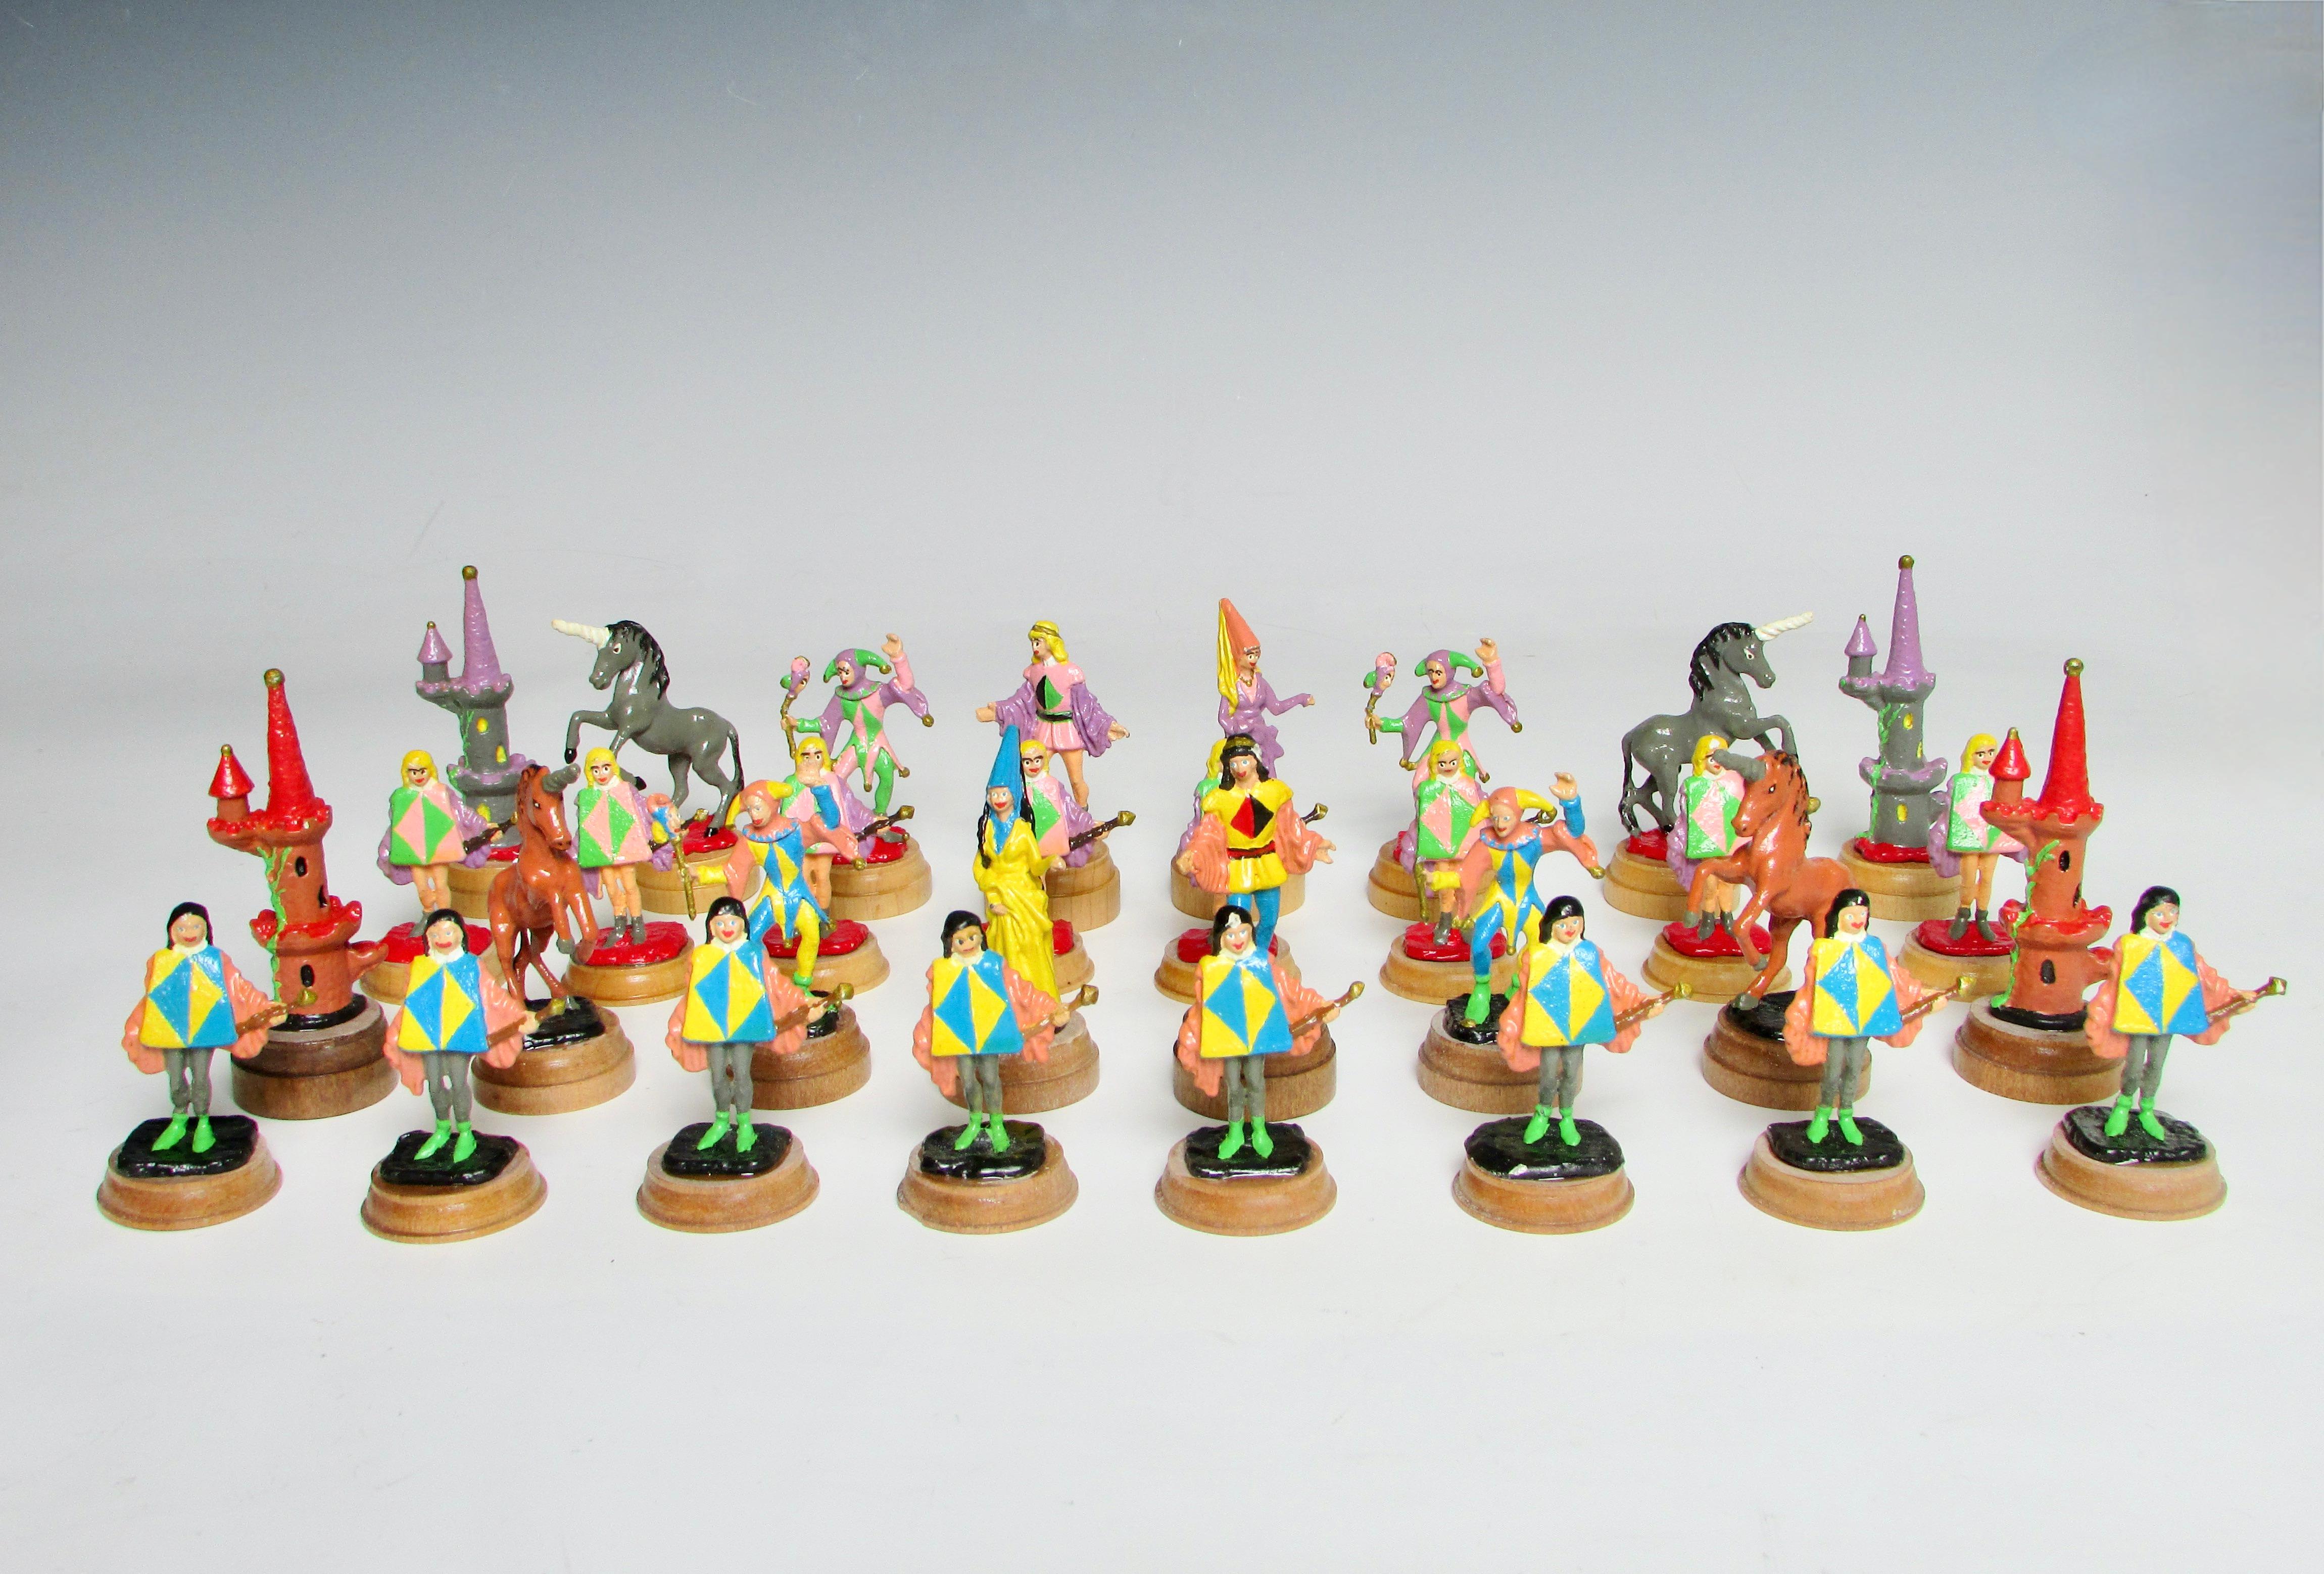 Board not included. Interesting set of lead soldier type figures each hand painted and mounted on turned wood disc bases. Castle as the rook is the largest piece at 3.5 tall, pages as pawns are 2.25 tall, bases have a 1.25 diameter. Unicorn serves